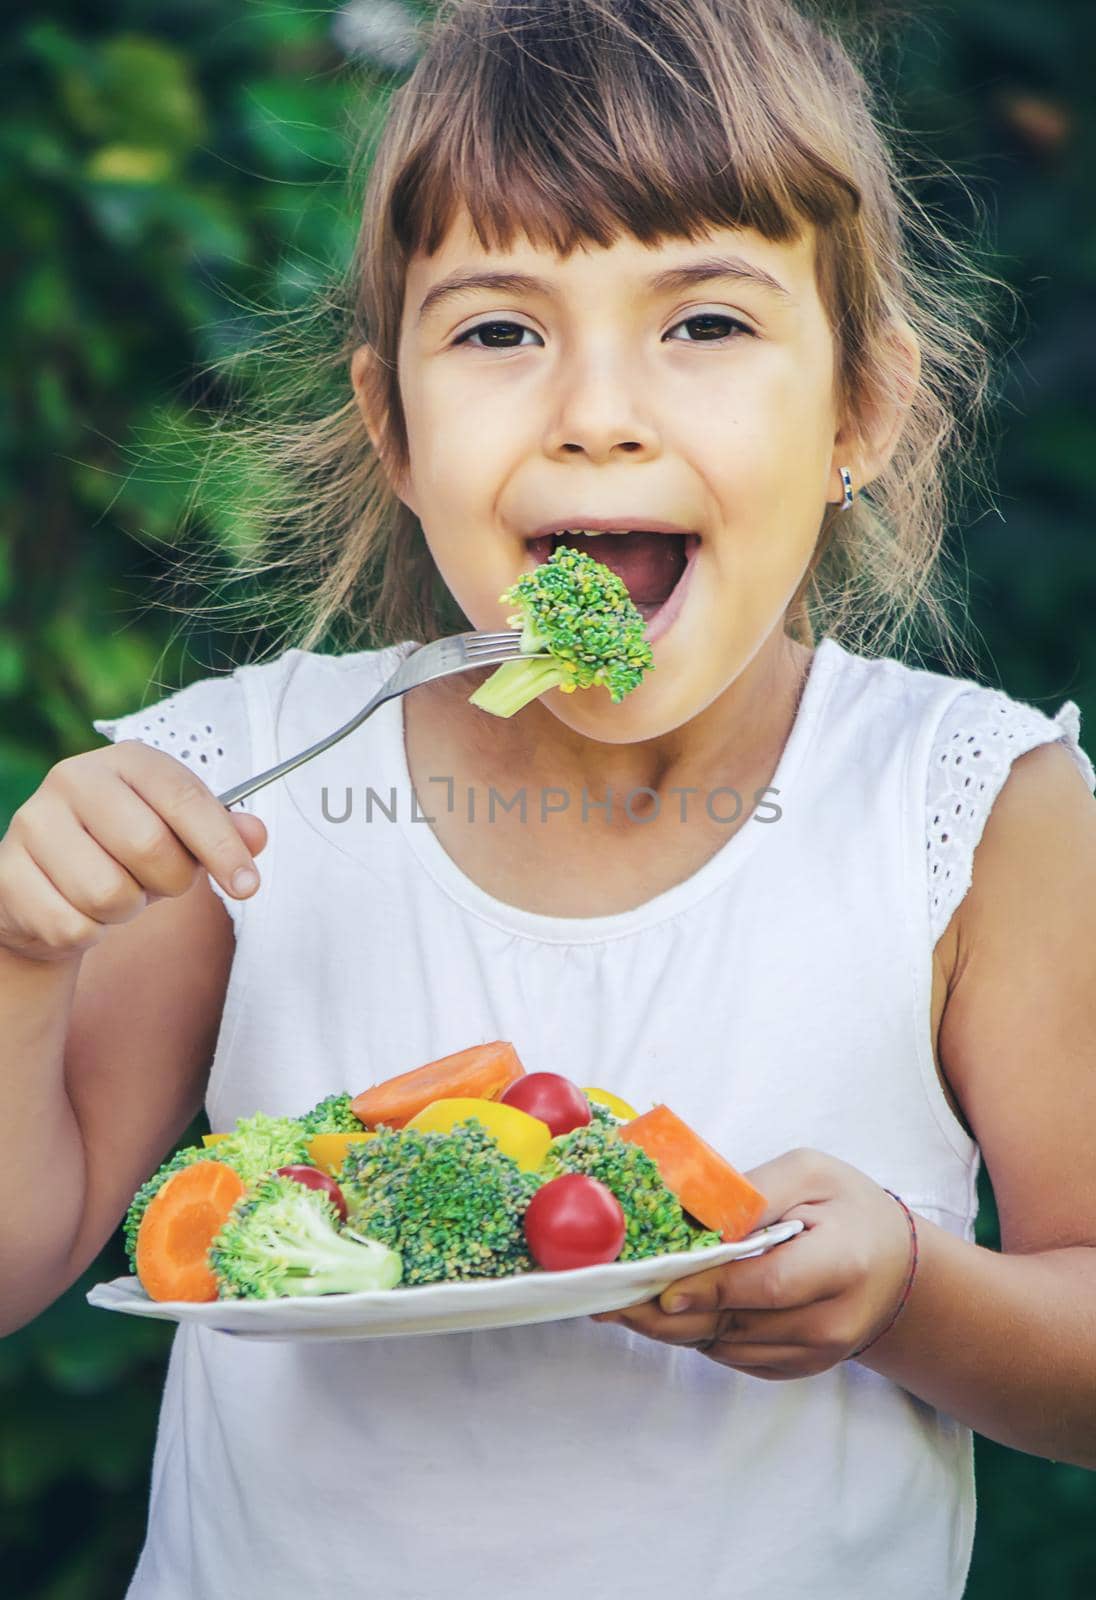 The child eats vegetables in summer. Selective focus. People.